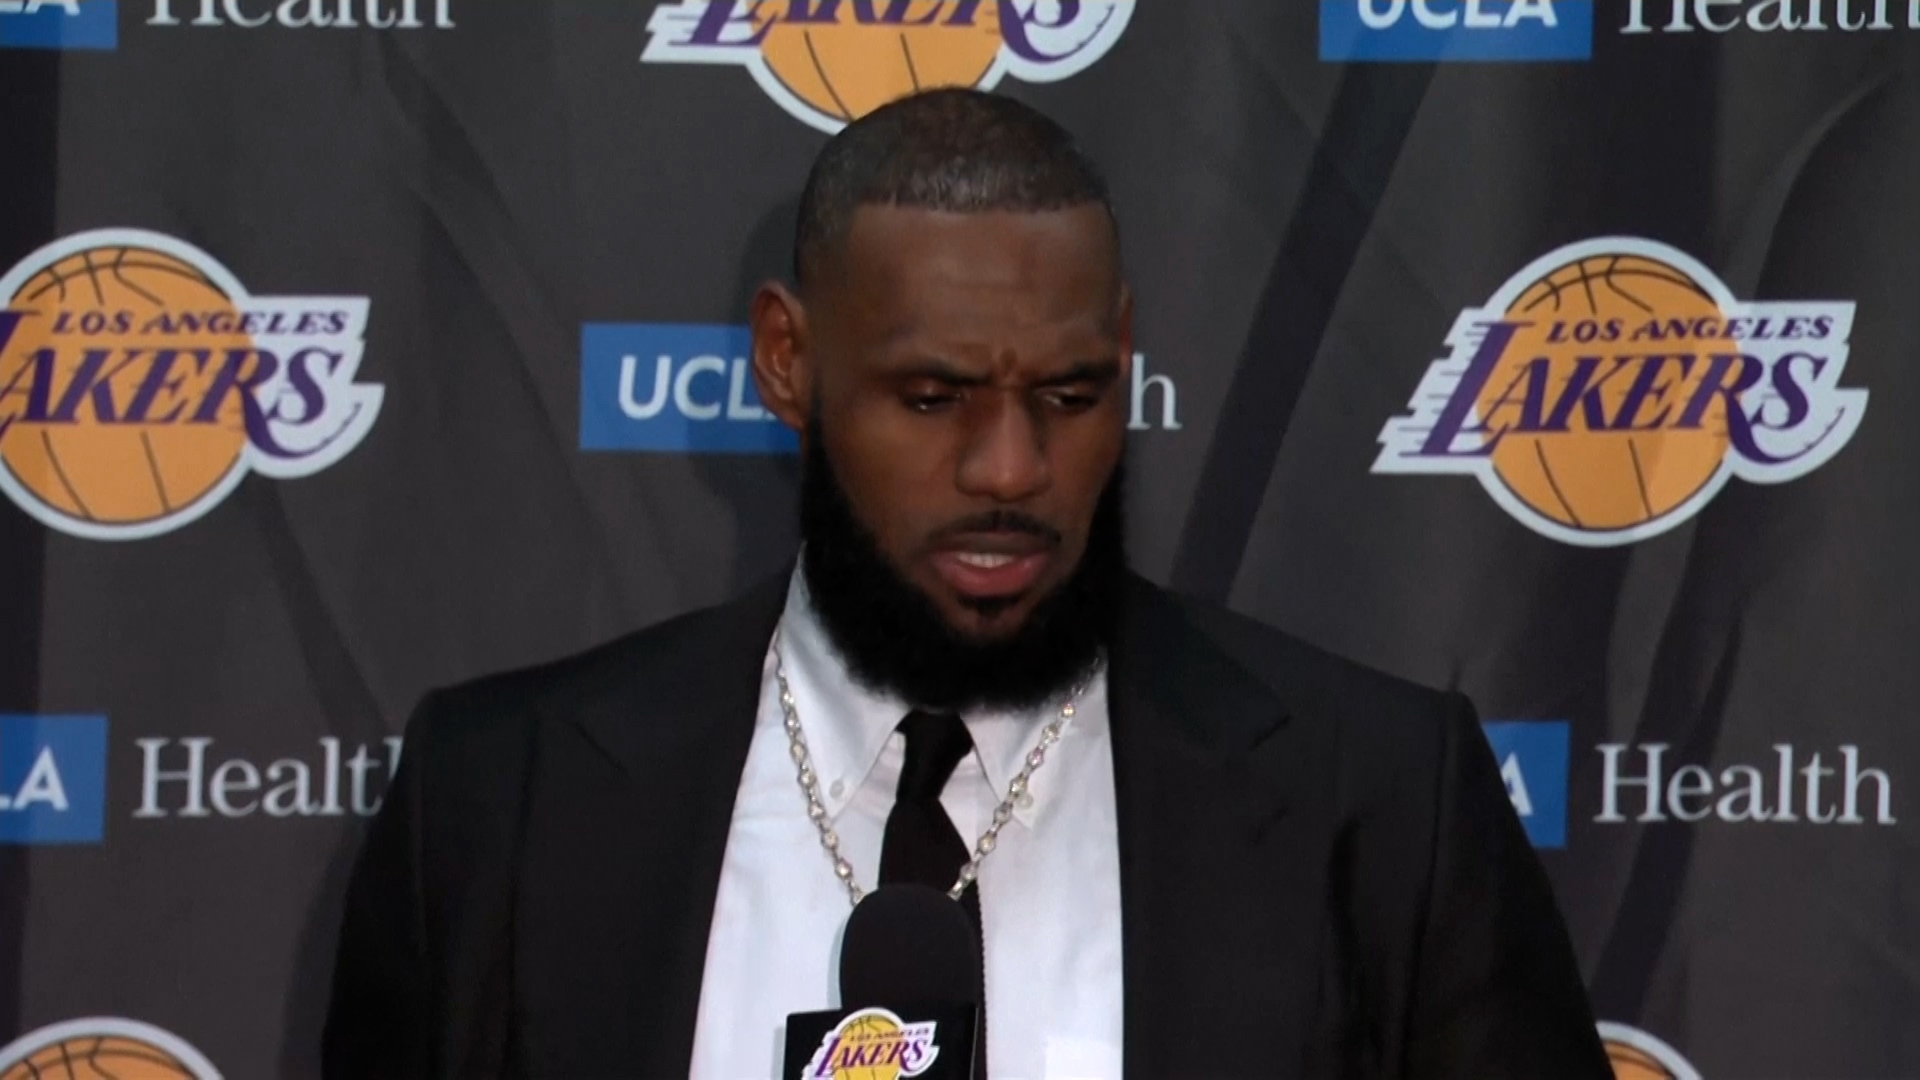 LeBron James: "Our record is our record"